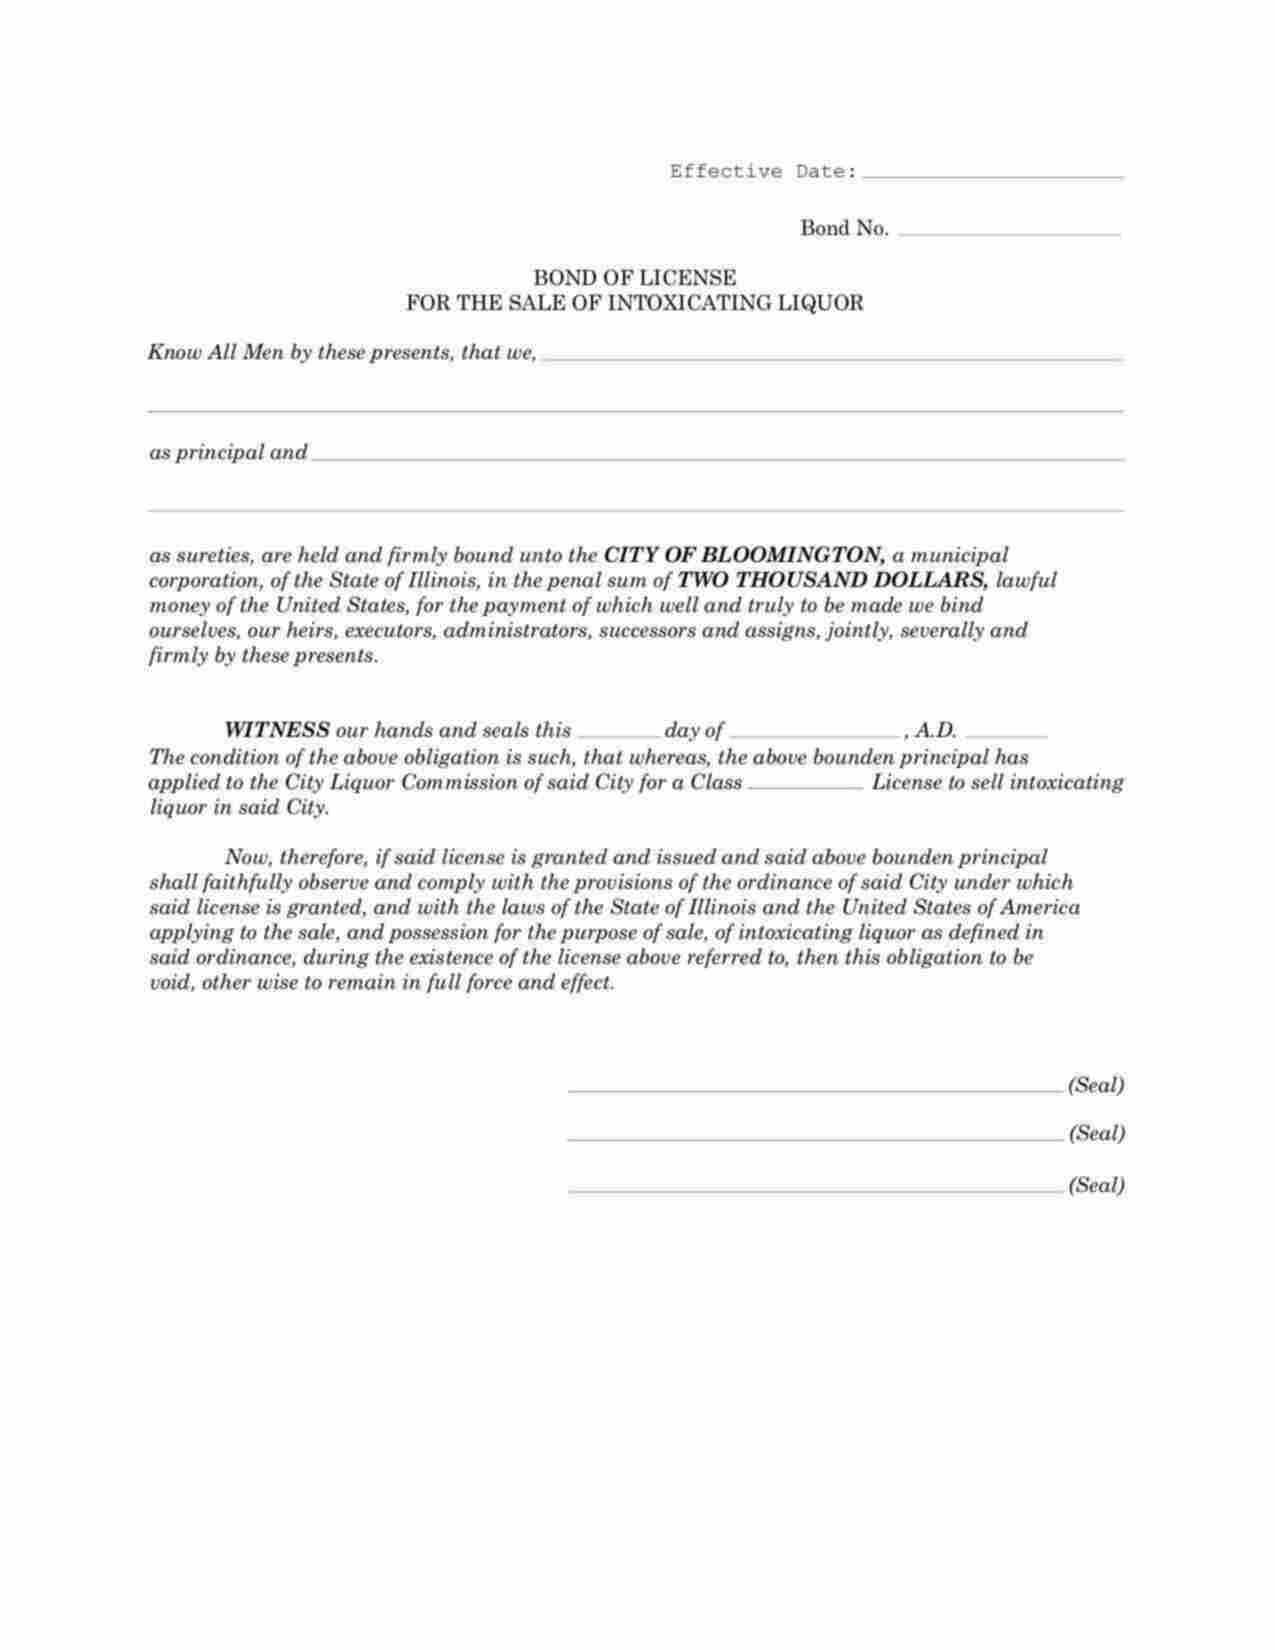 Illinois License for the Sale of Intoxicating Liquor Bond Form